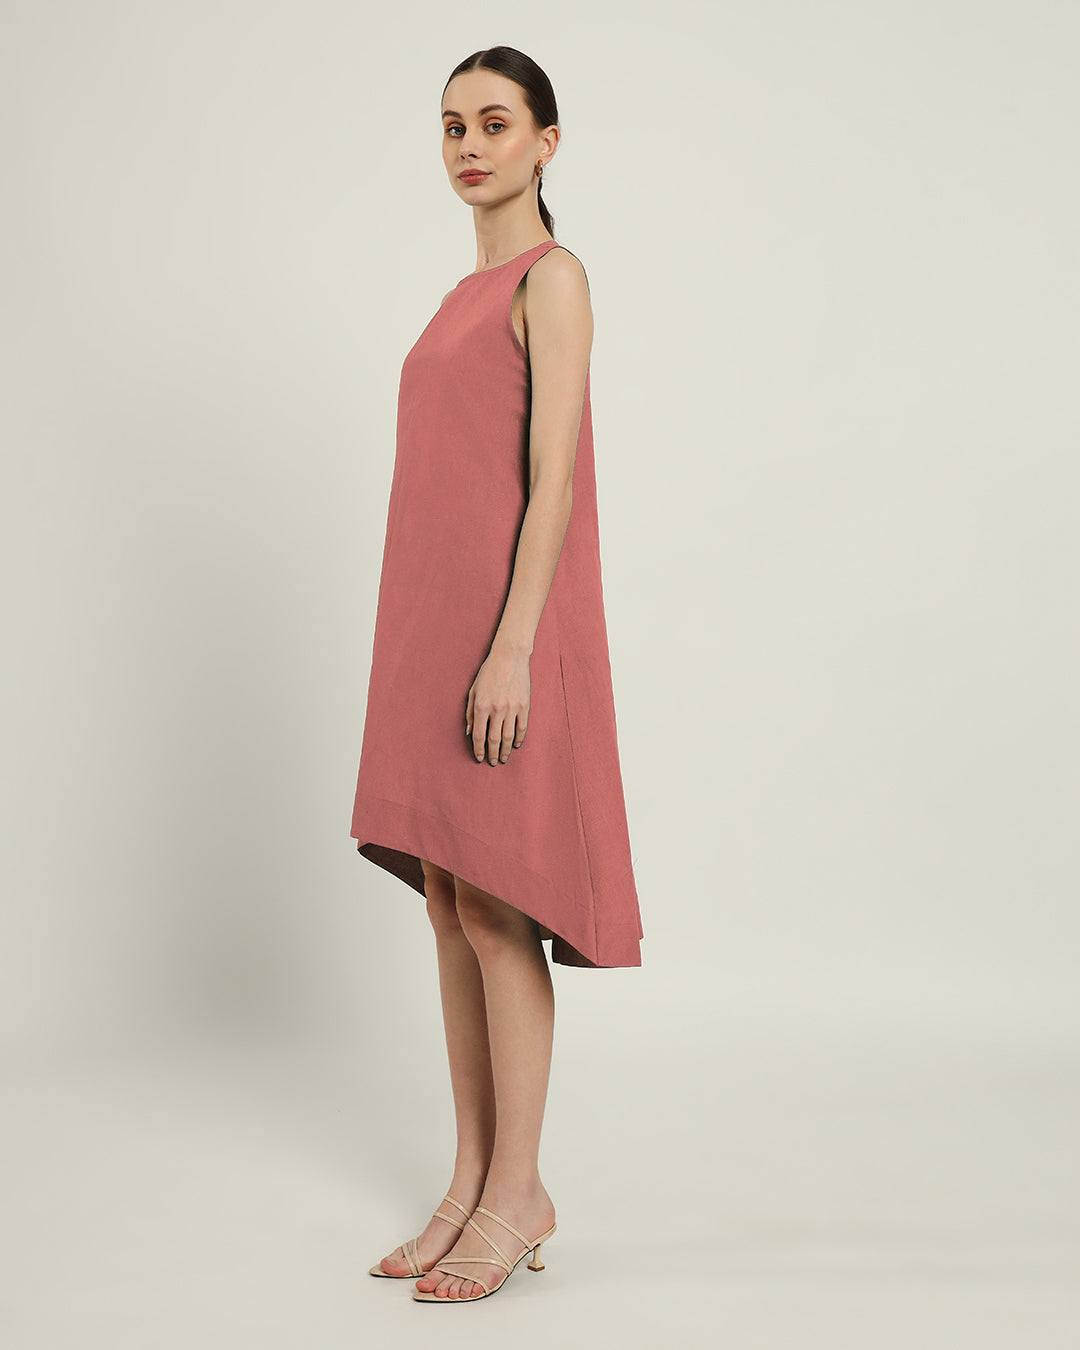 The Odesa Ivory Pink Cotton Dress